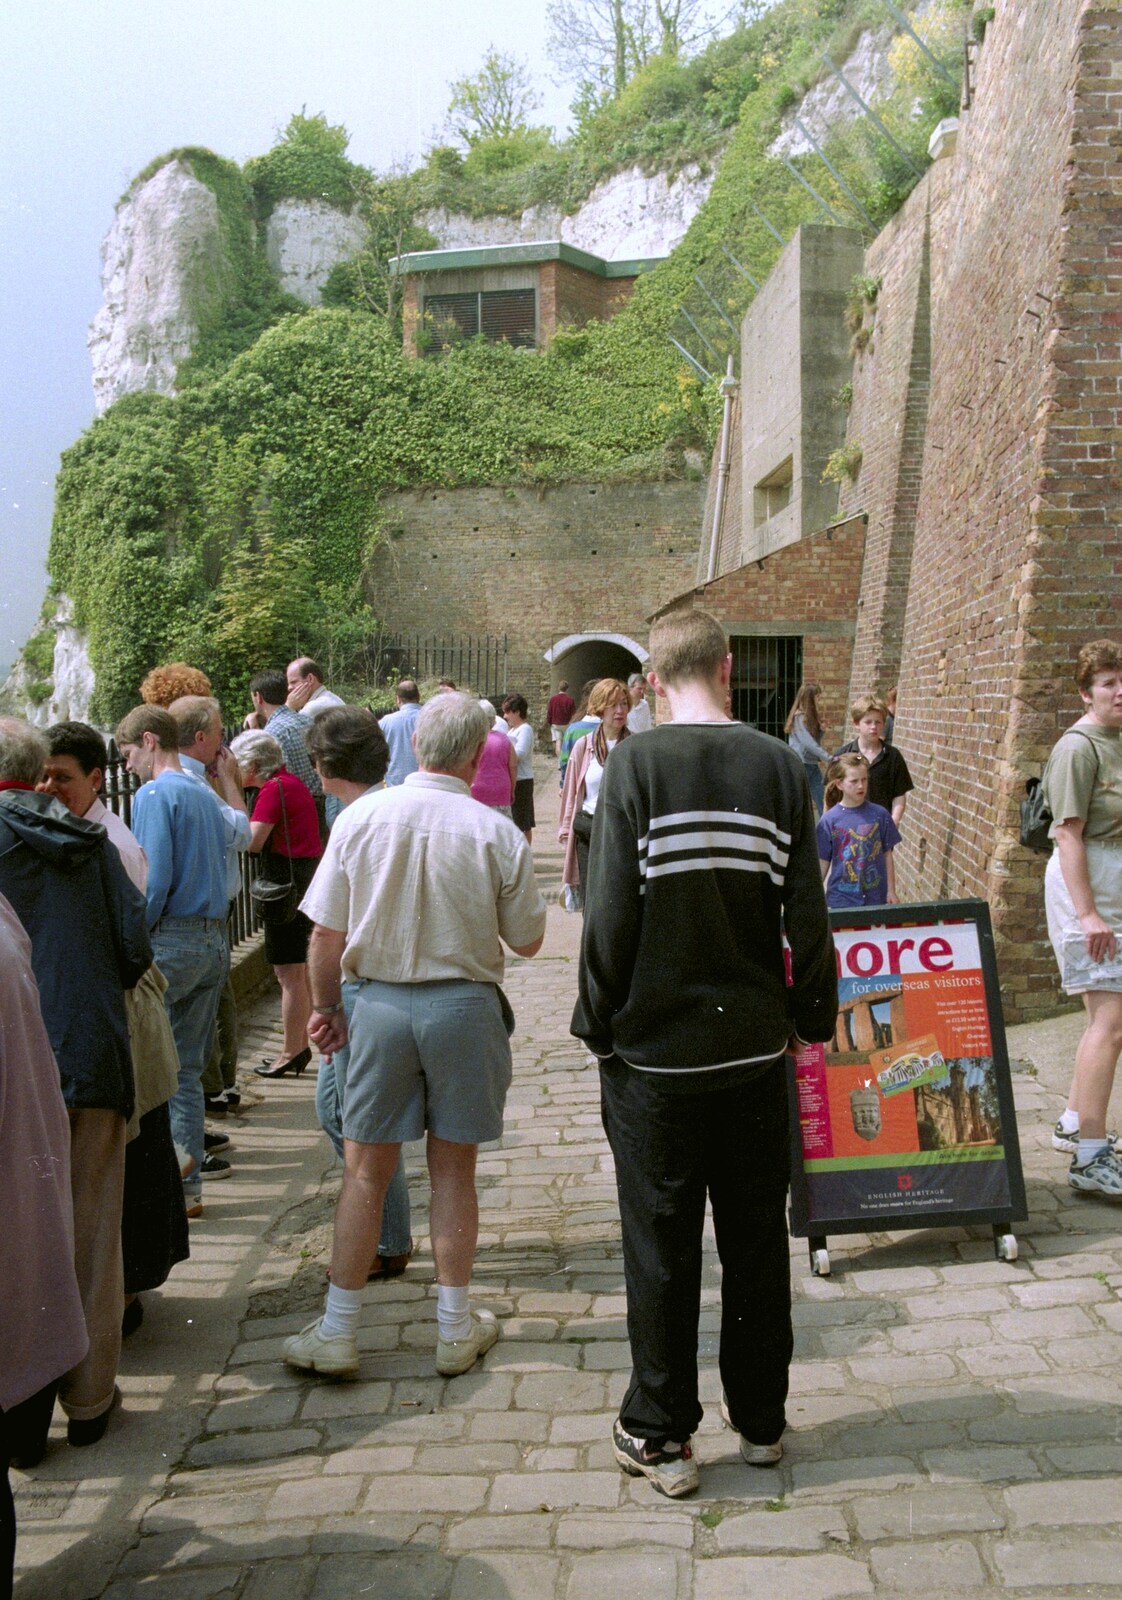 Tourists mill around from A BSCC Bike Ride to Gravelines, Pas de Calais, France - 11th May 2000